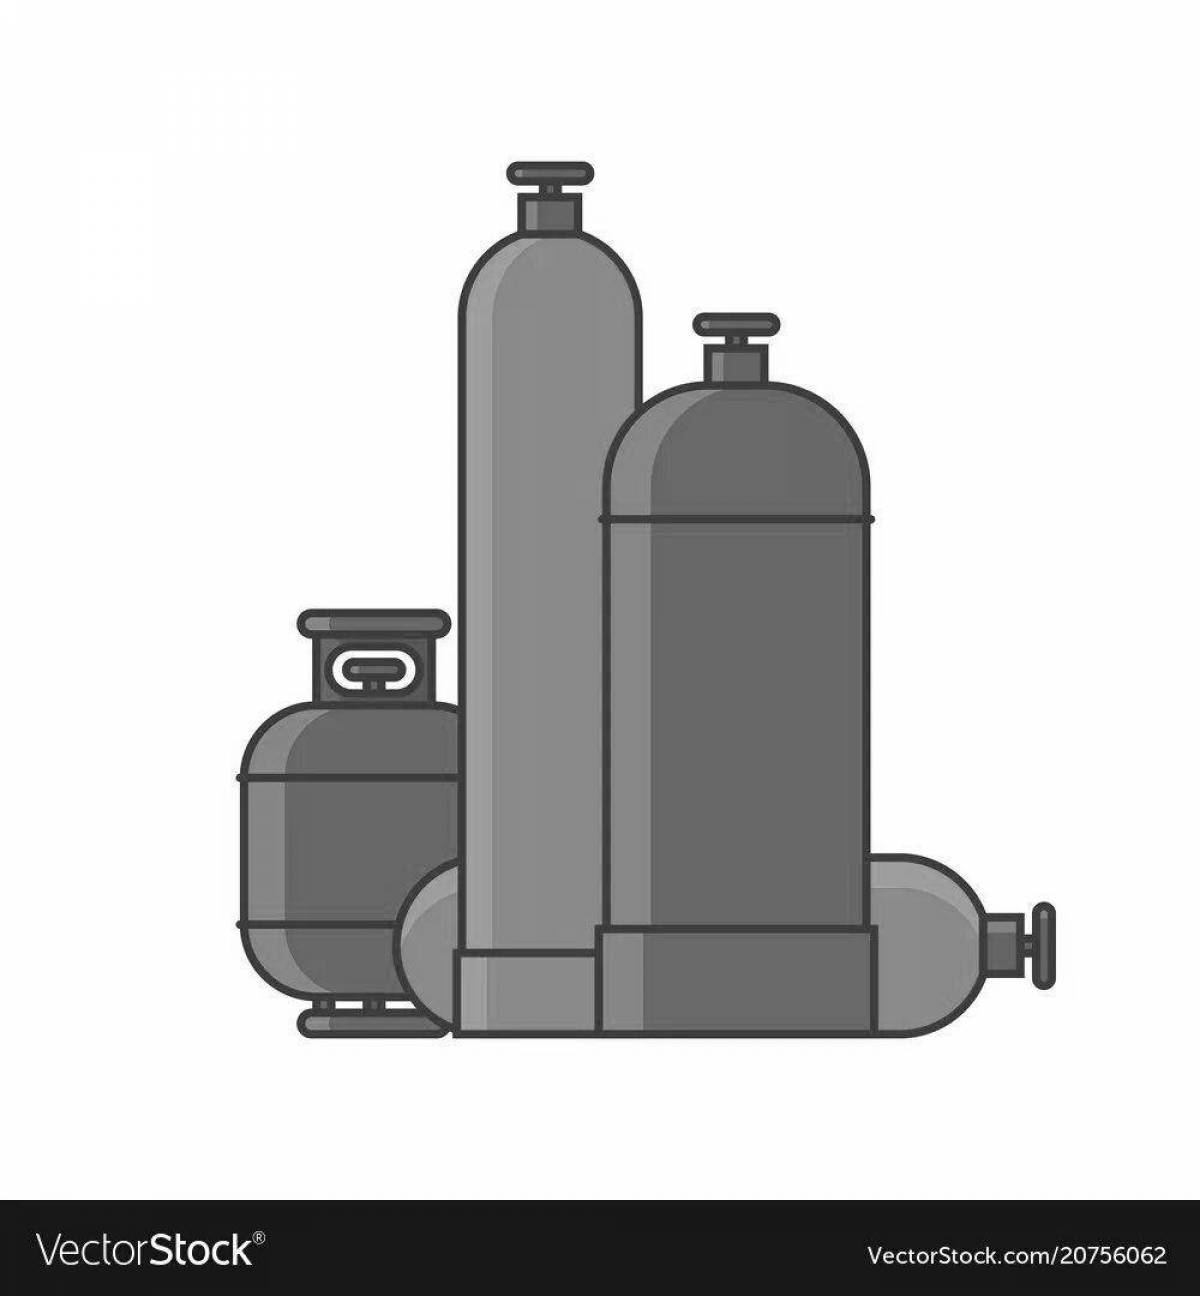 Colouring happy gas cylinders